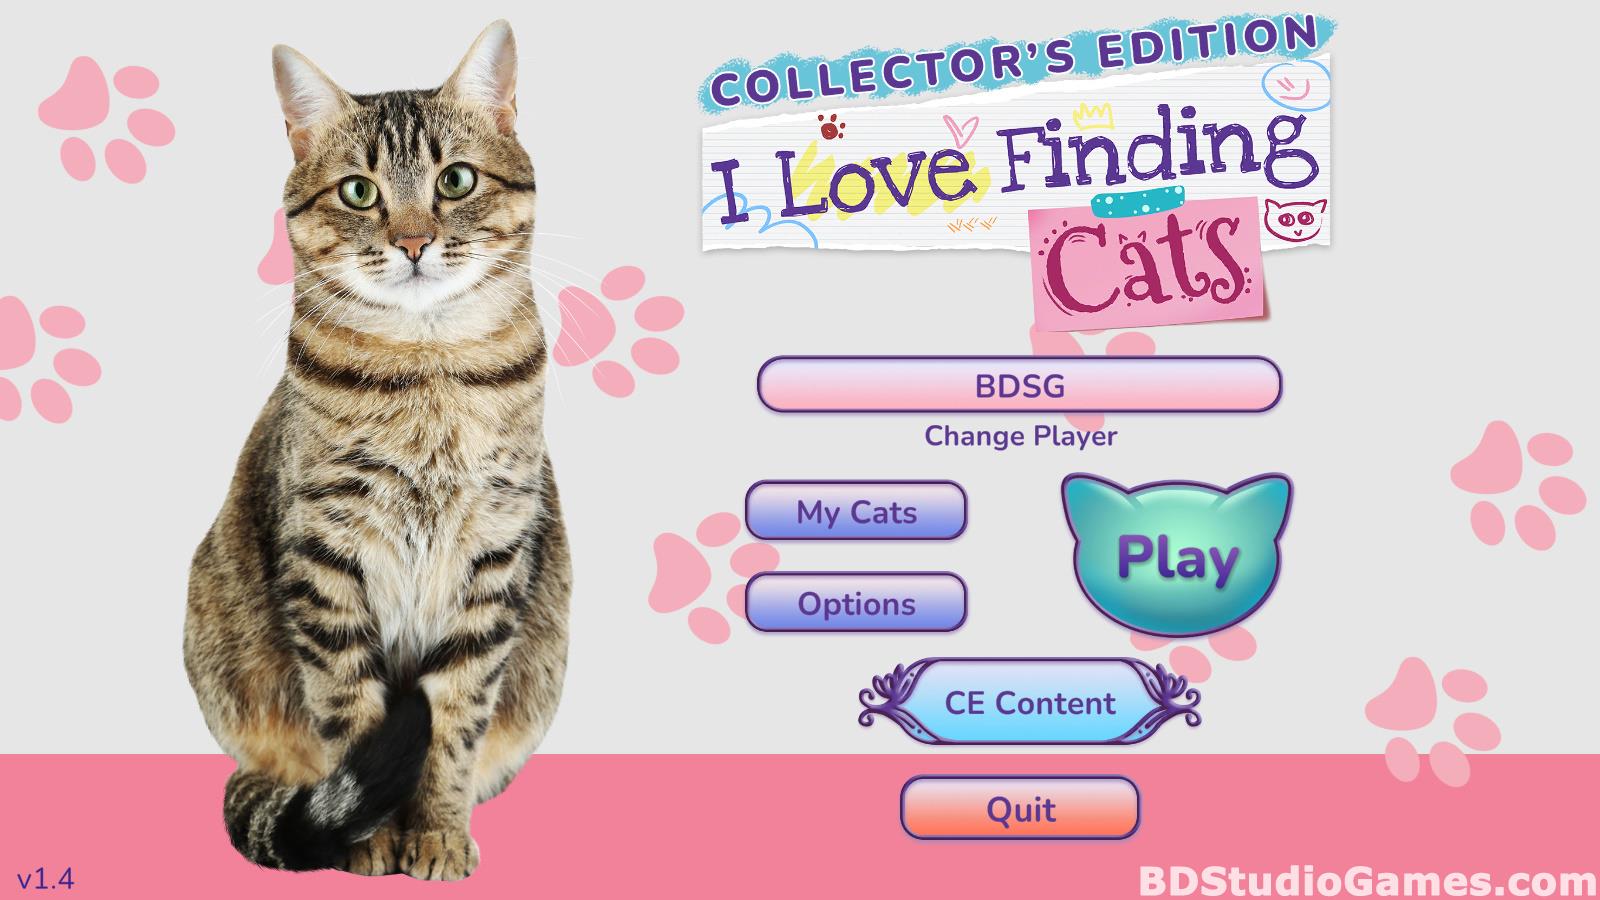 I Love Finding Cats Collector's Edition Free Download Screenshots 01